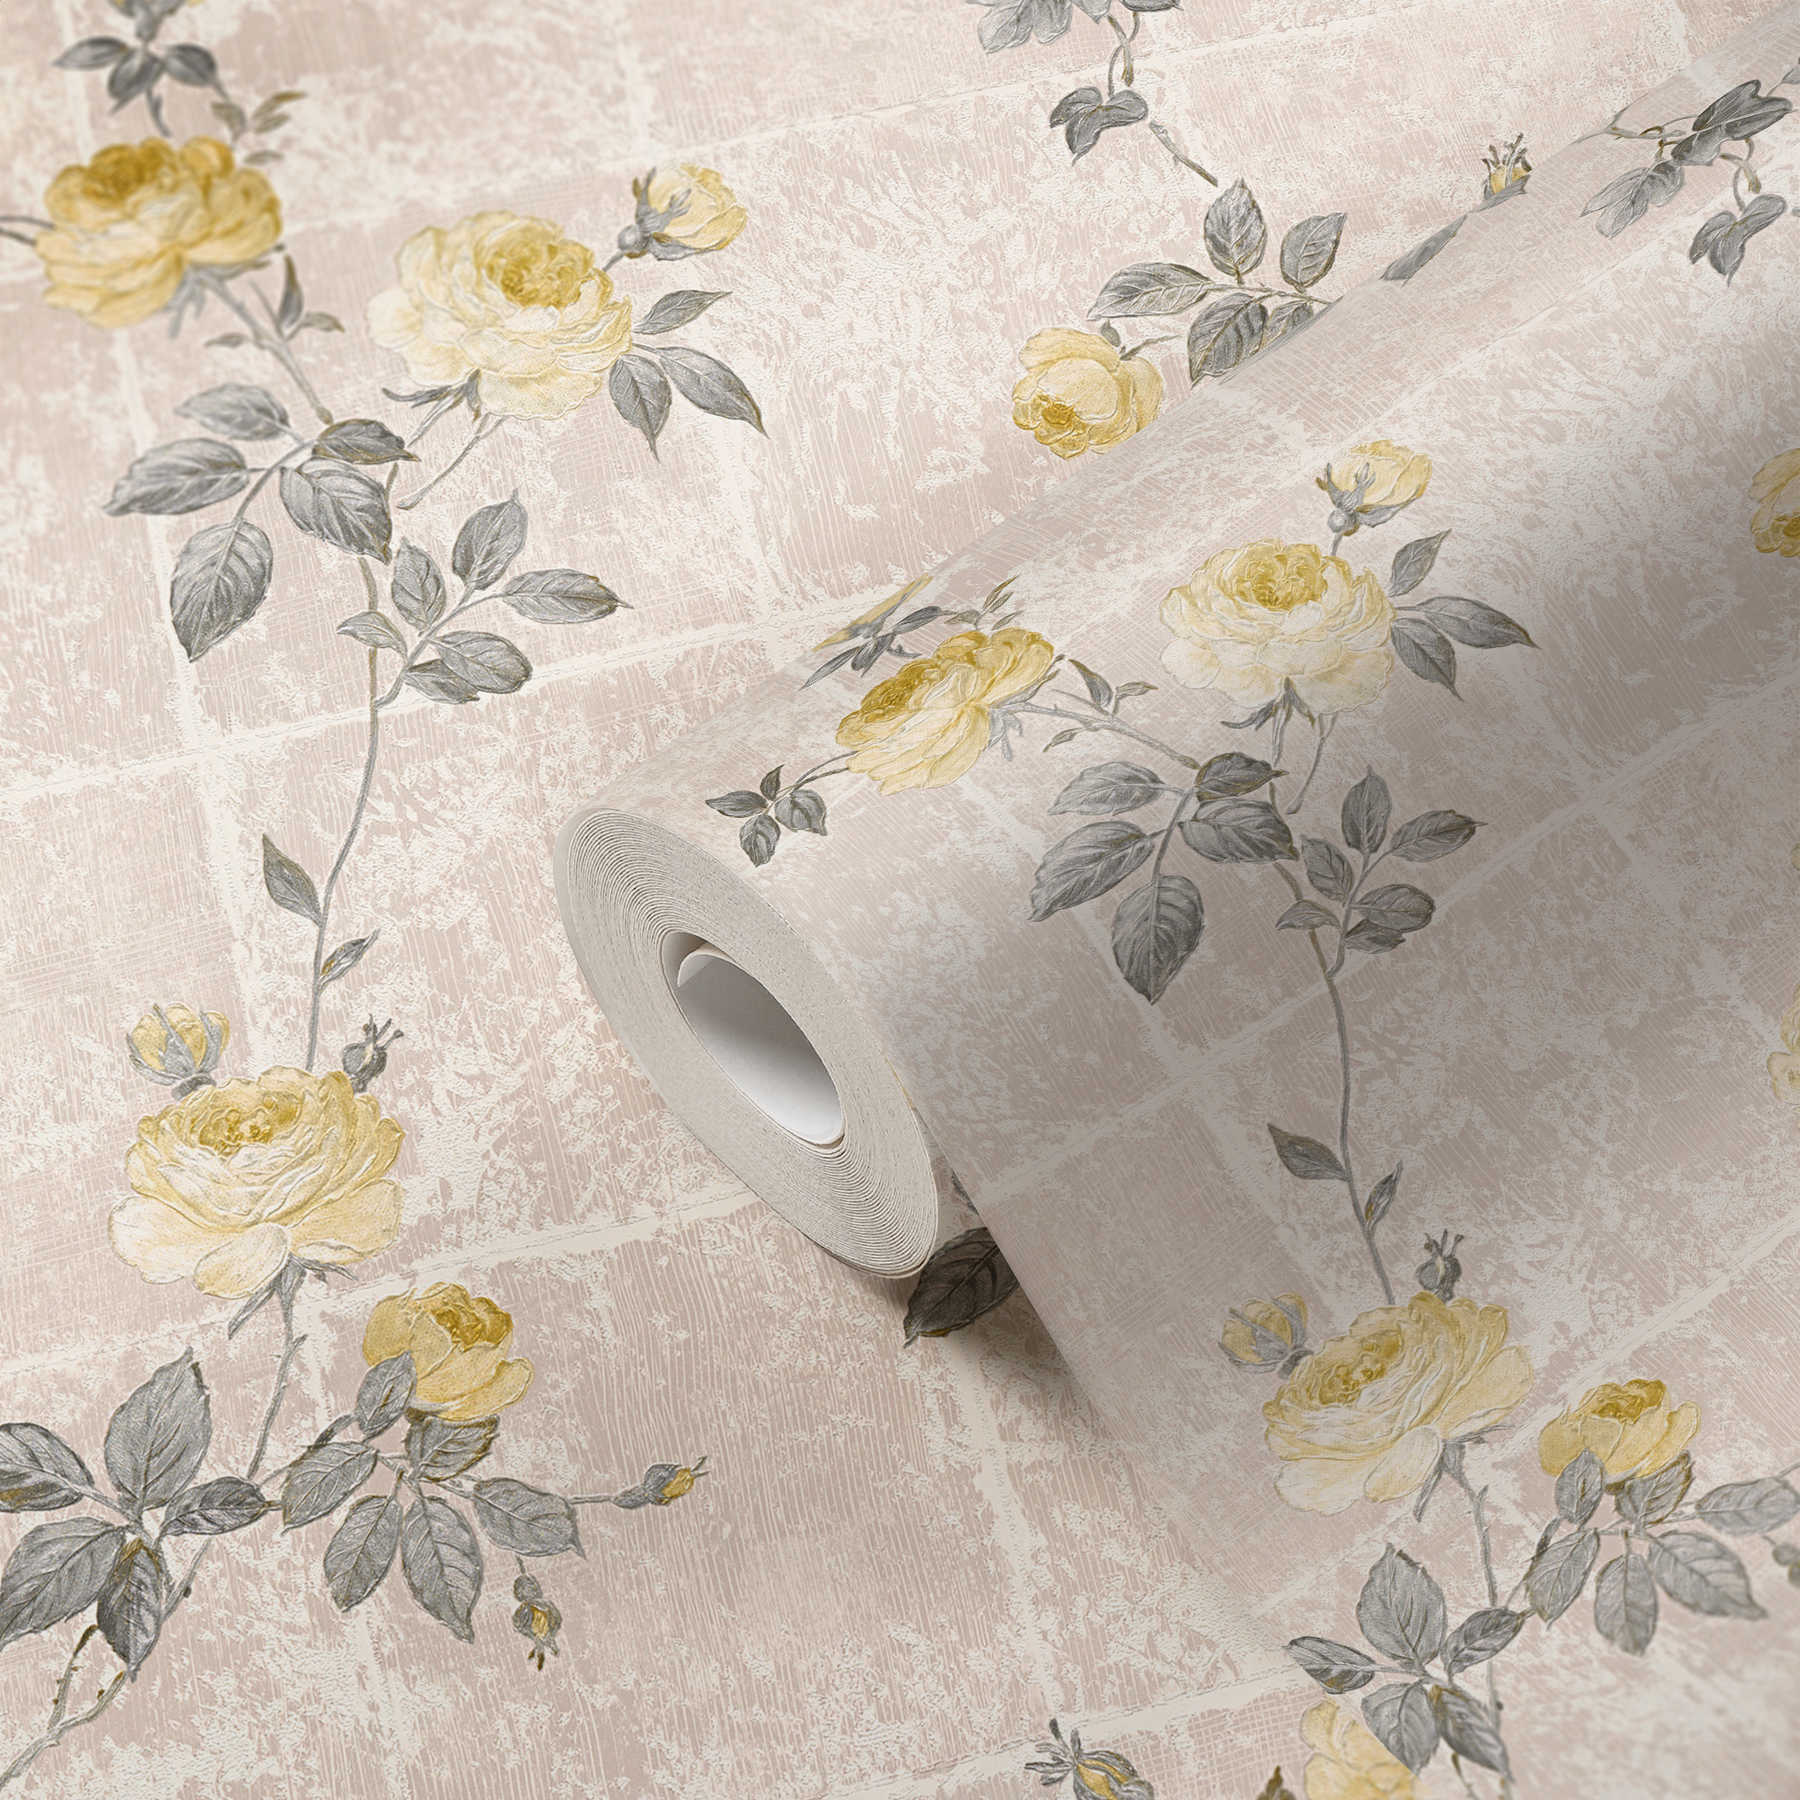             Country style wallpaper tile pattern and roses - yellow, beige
        